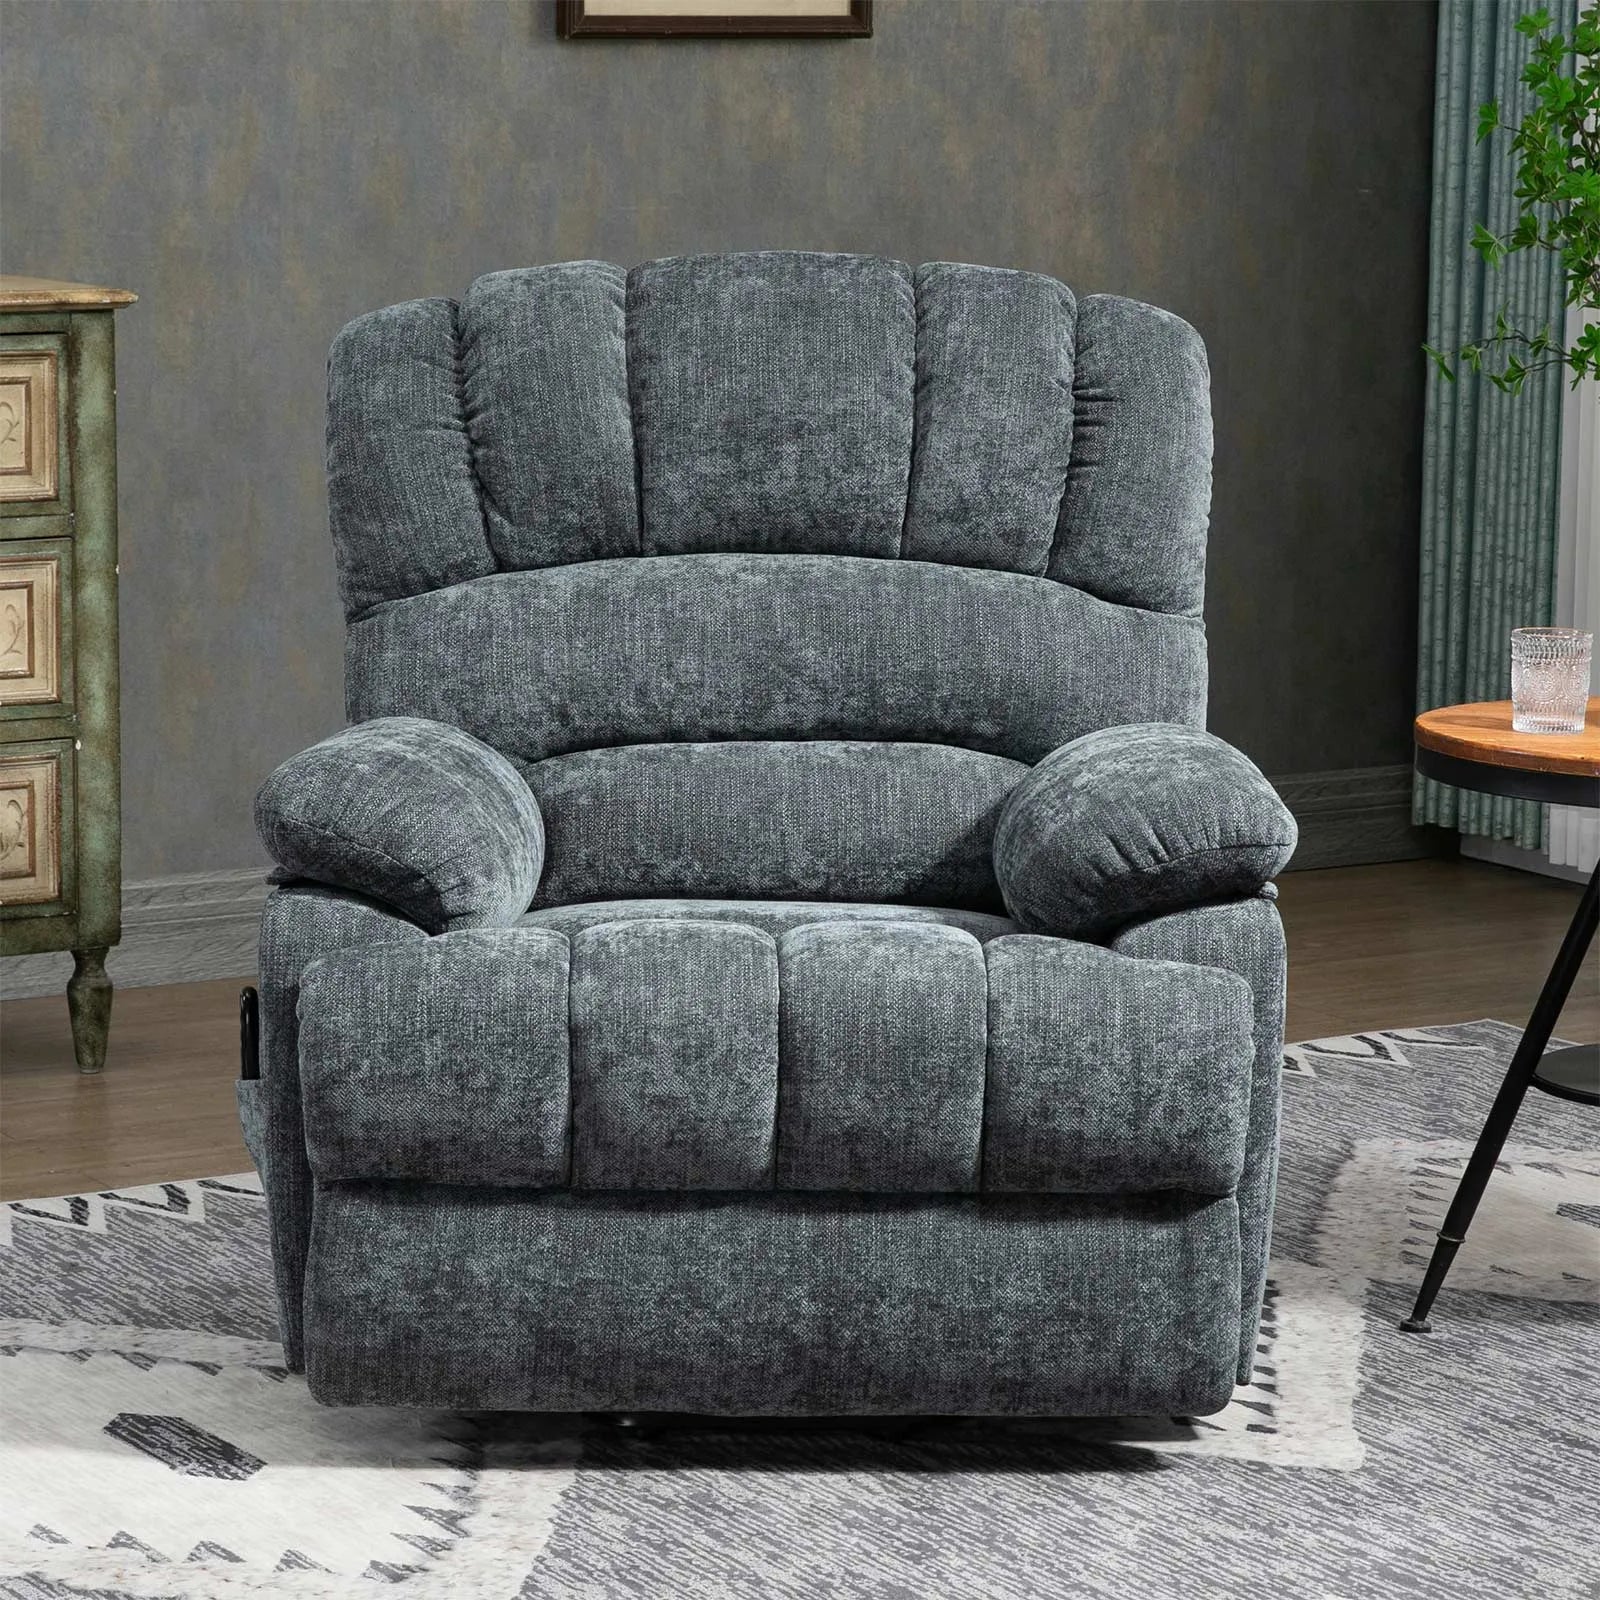 small lift recliner chair for petite seniors